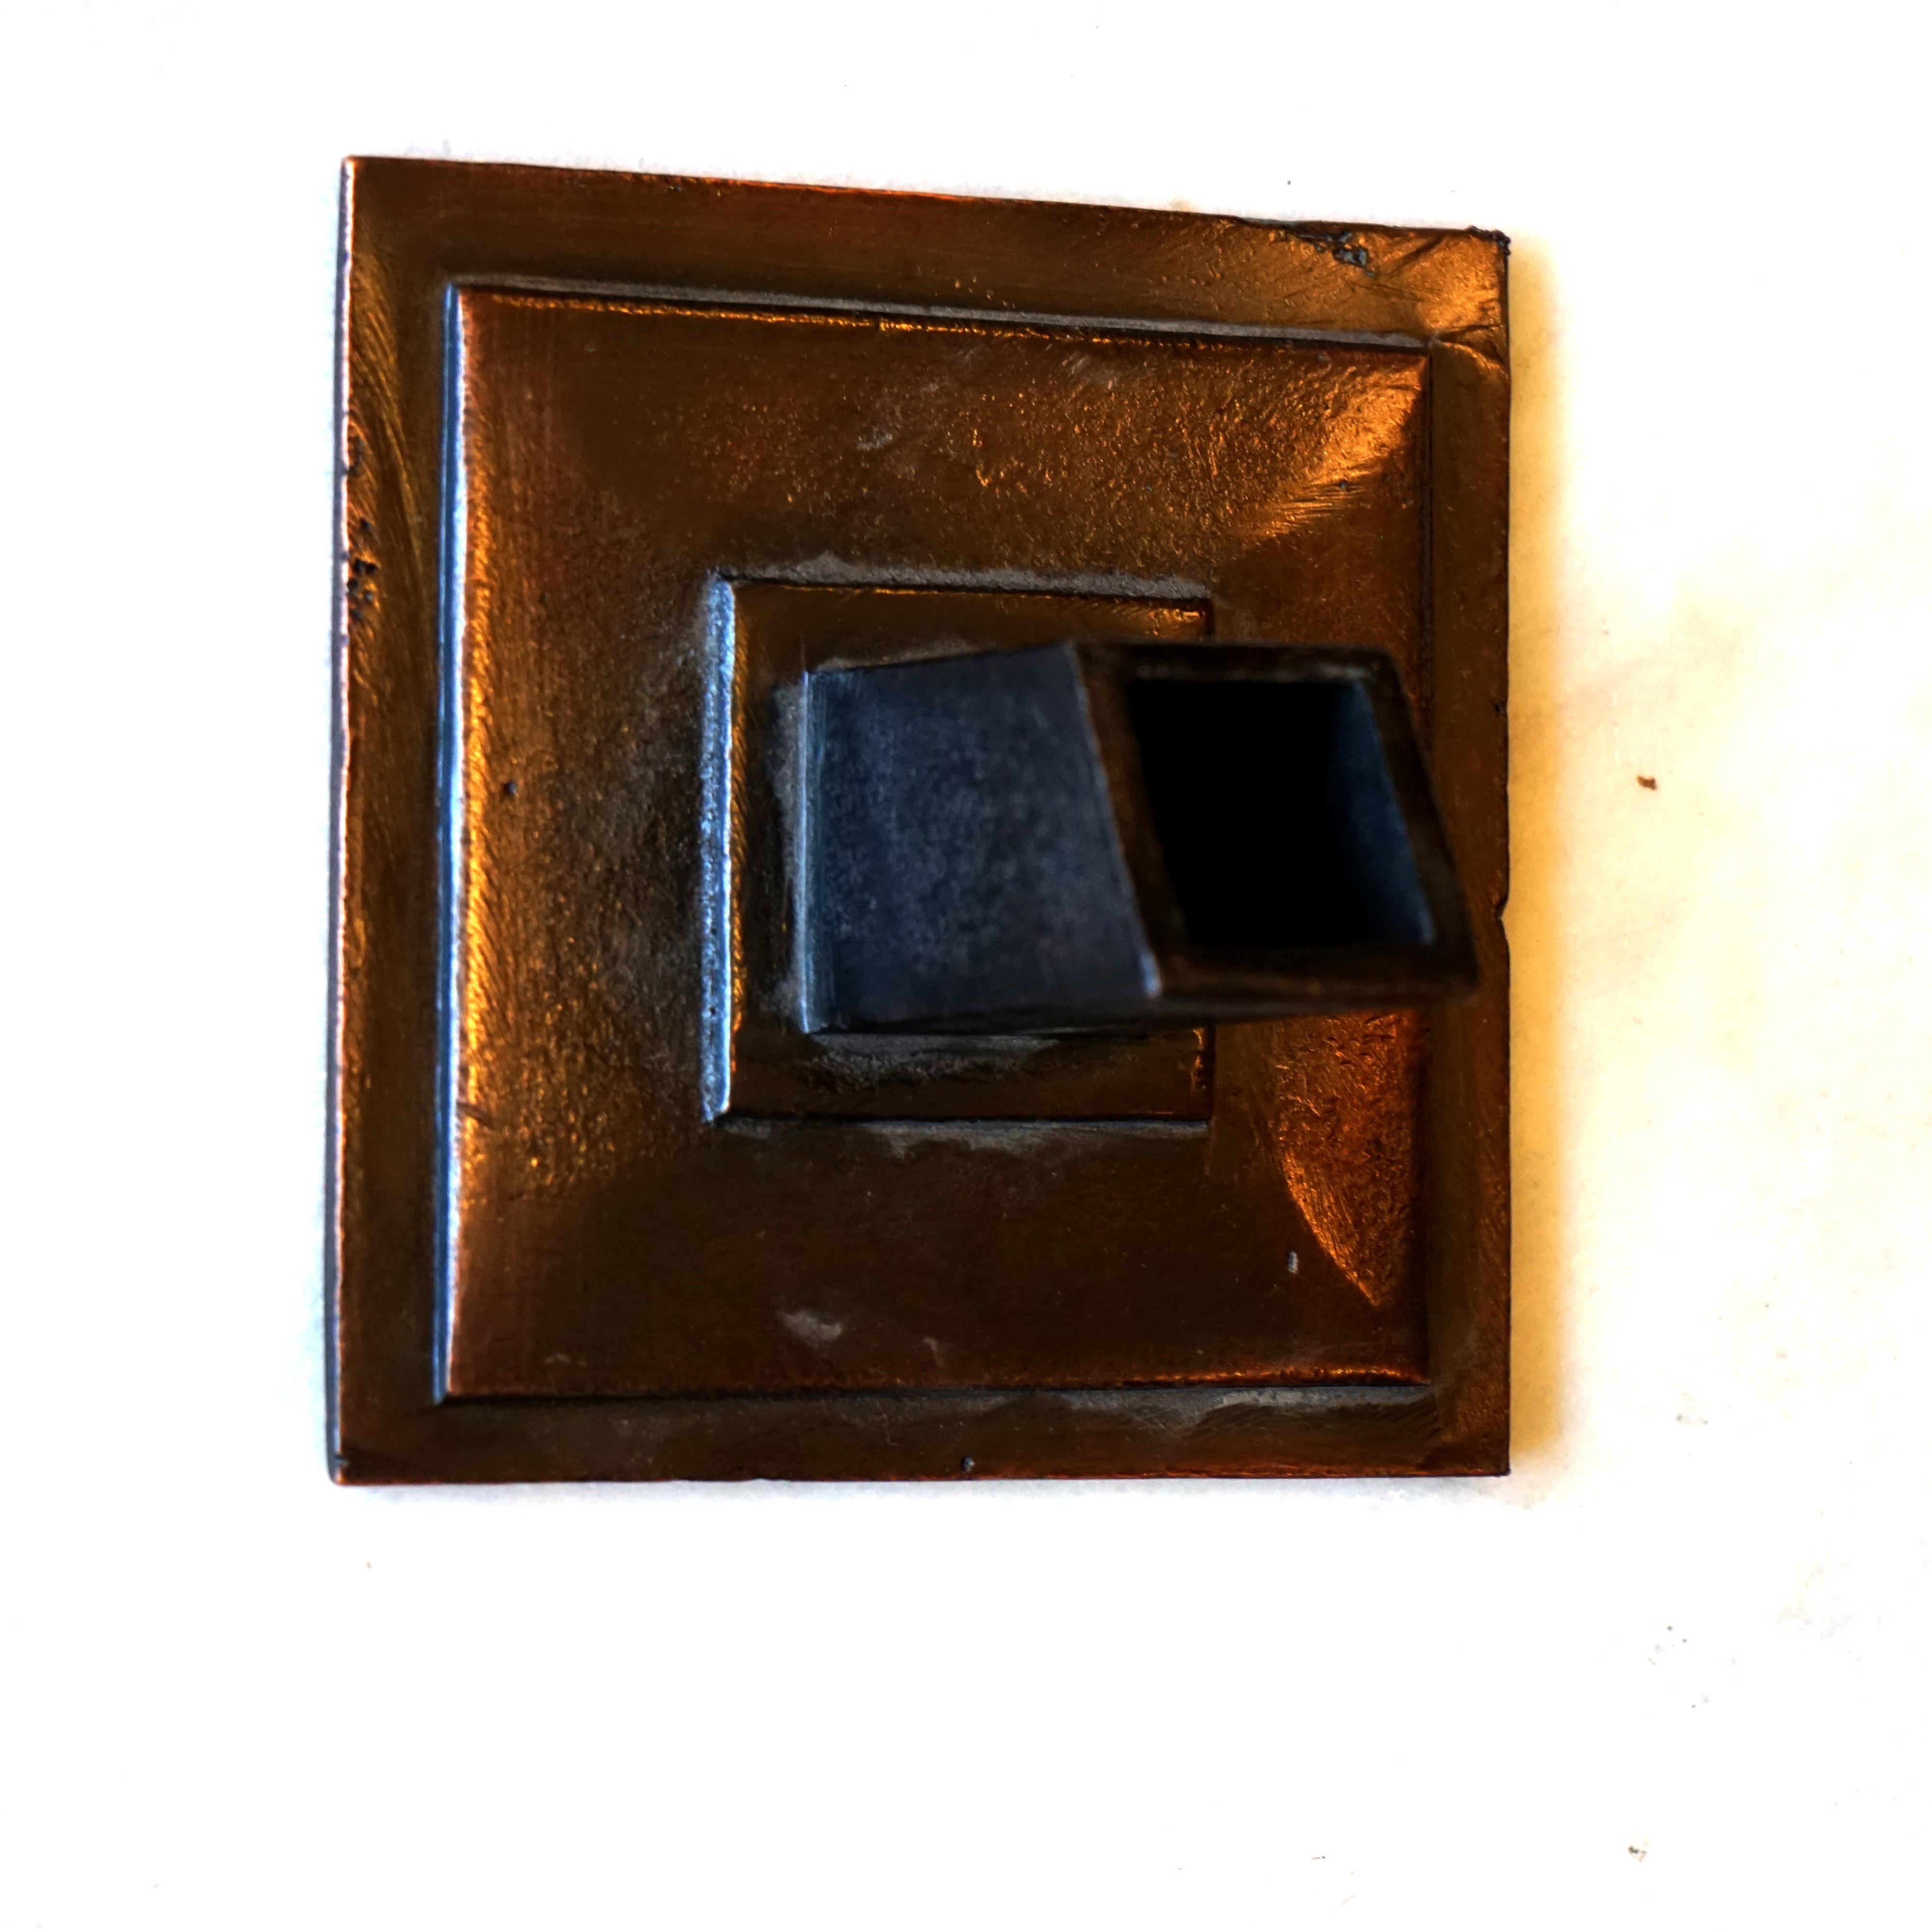 This brass water exit is in new condition and can be replicated in various sizes.

Measurements: 6.25” H x 6” W x 4” D.